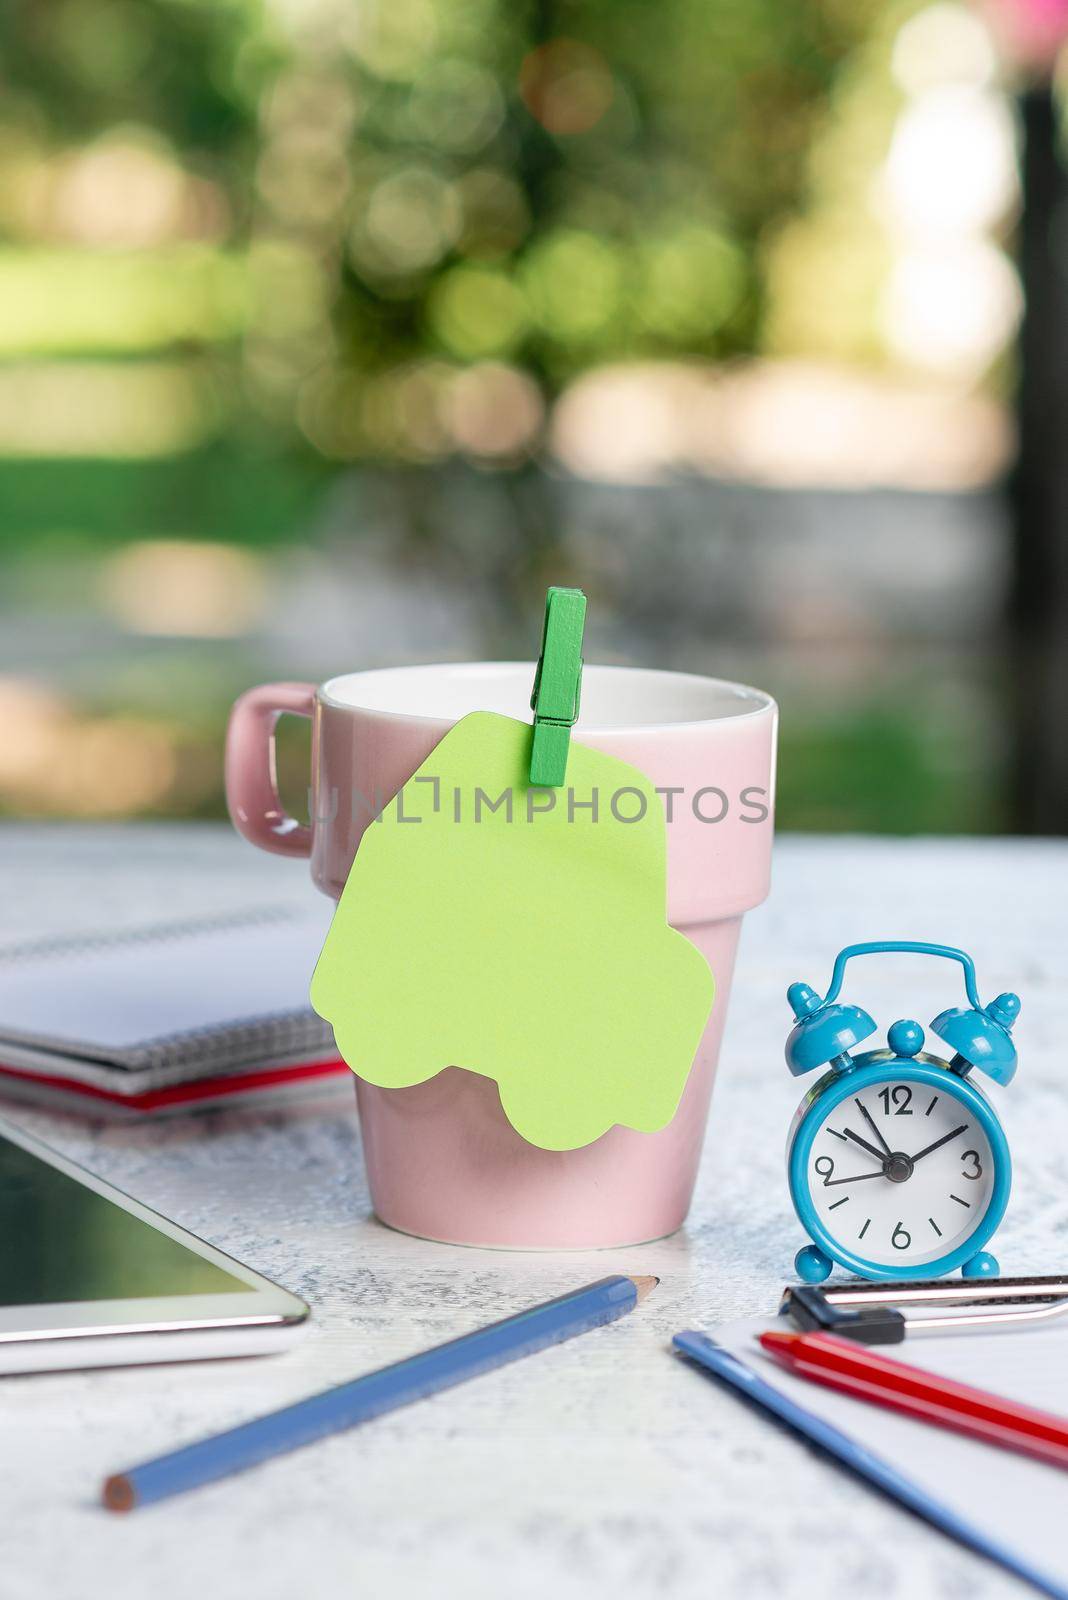 Outdoor Coffee Refreshment Shop Ideas, Cafe Working Experience, Writing Important Notes, Drafting New Letters, Creating Written Articles, Managing Business by nialowwa